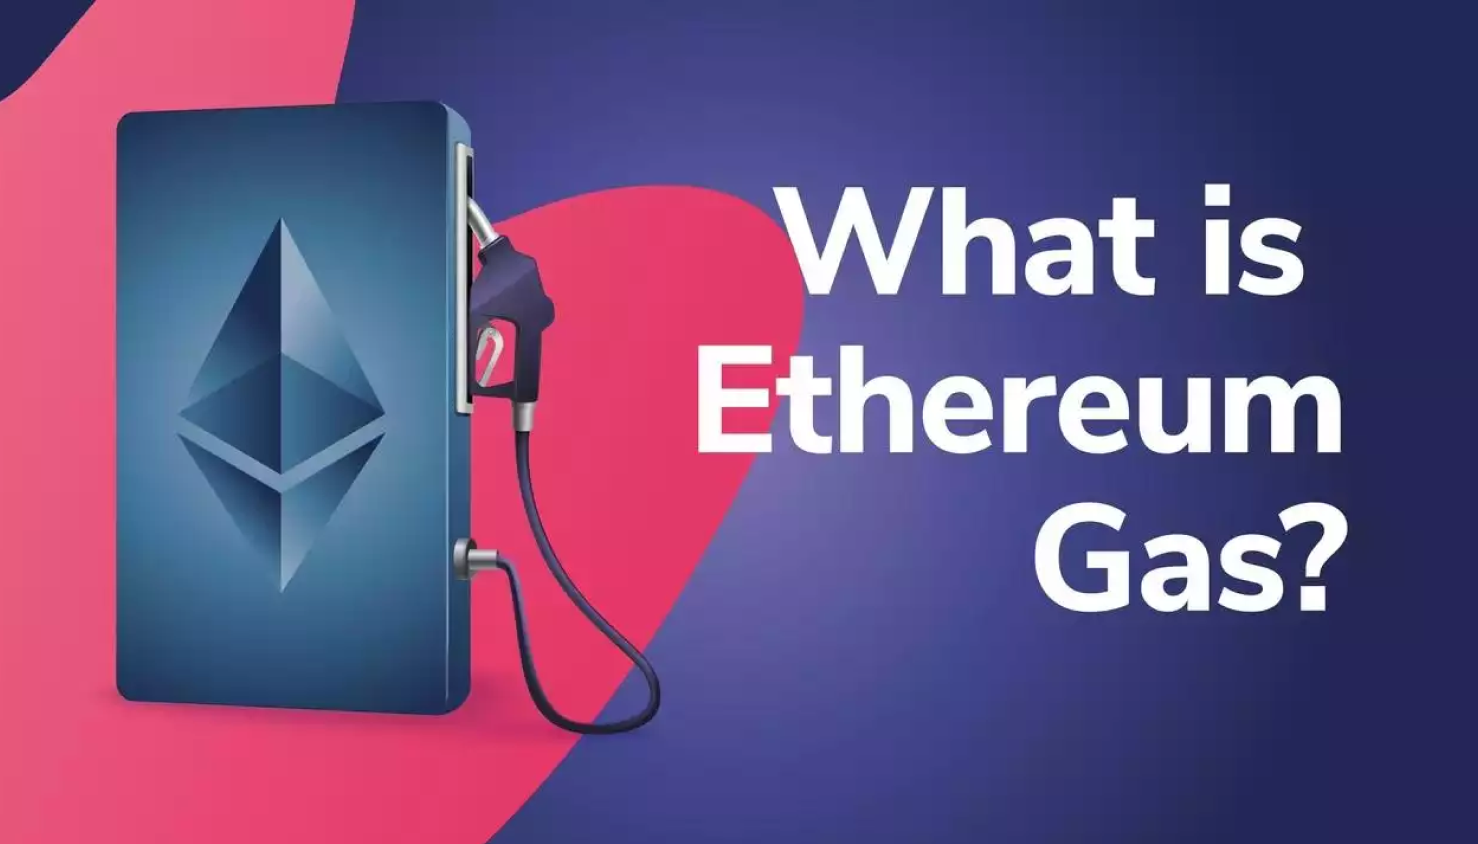 What are Gas Fees in crypto?